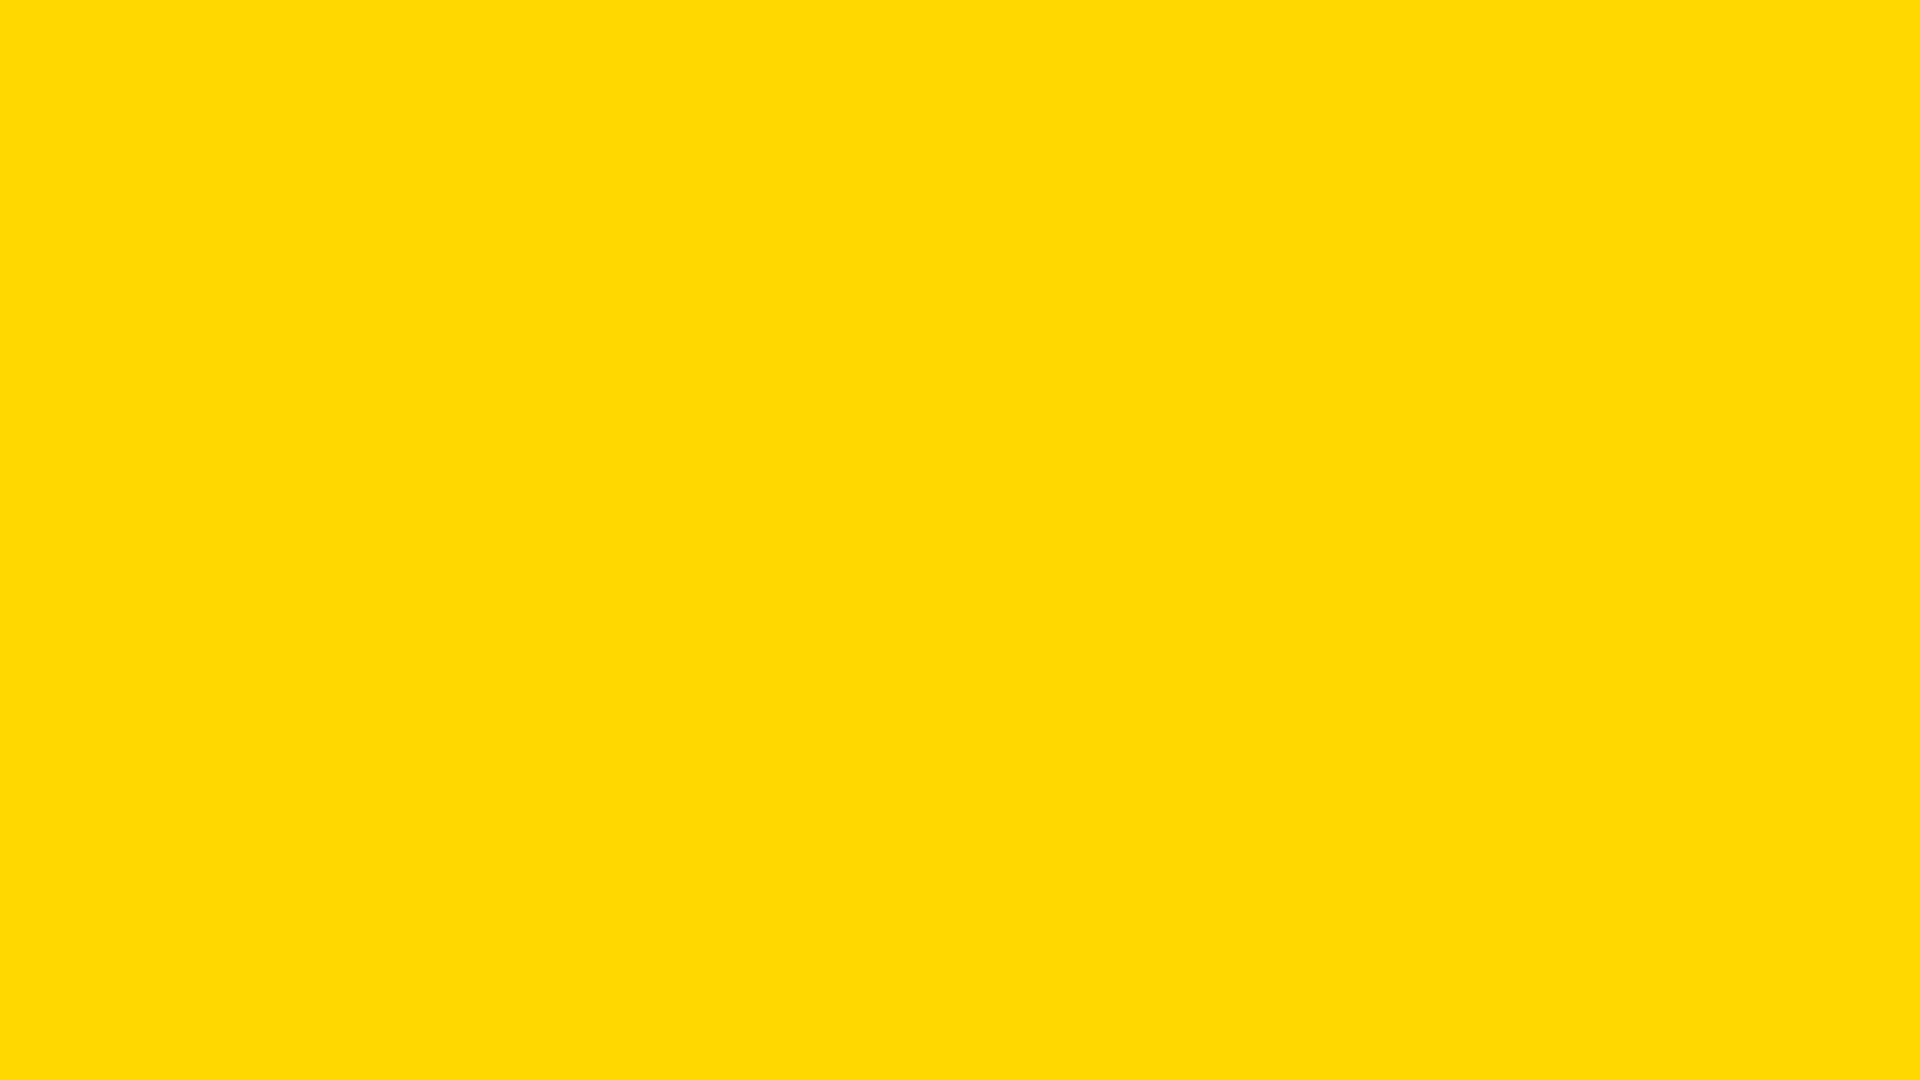 1920x1080 School Bus Yellow Solid Color Background